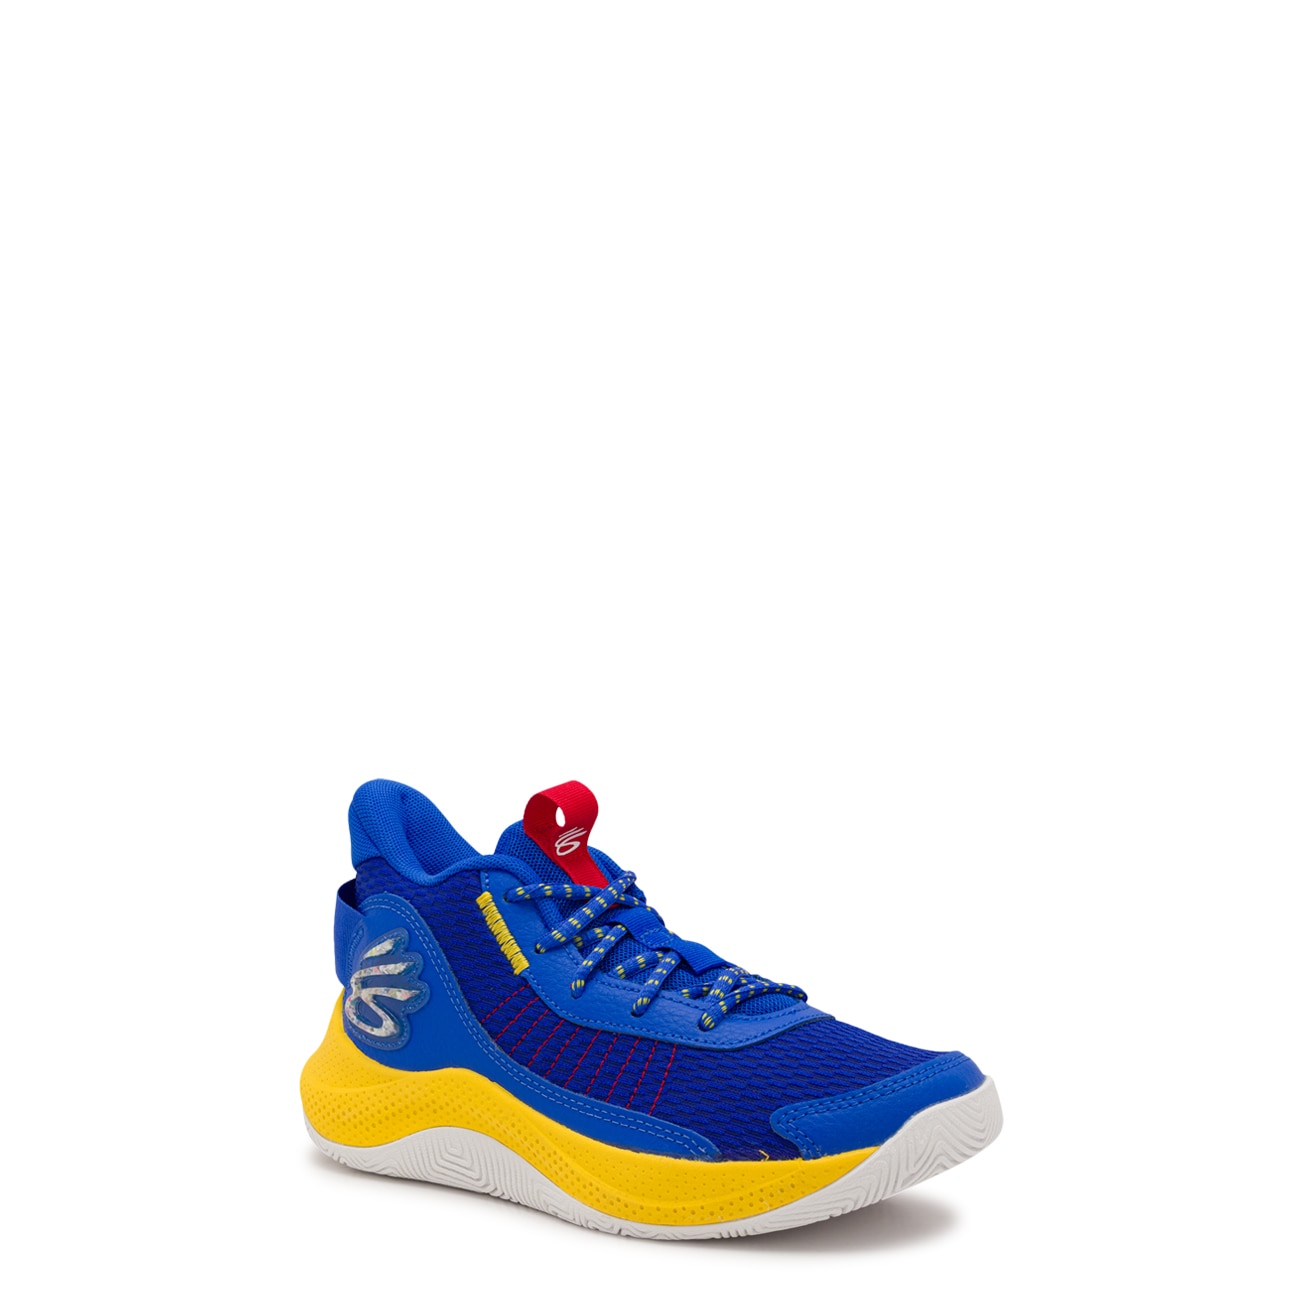 Youth Boys' Stephen Curry 3Z7 Basketball Shoe